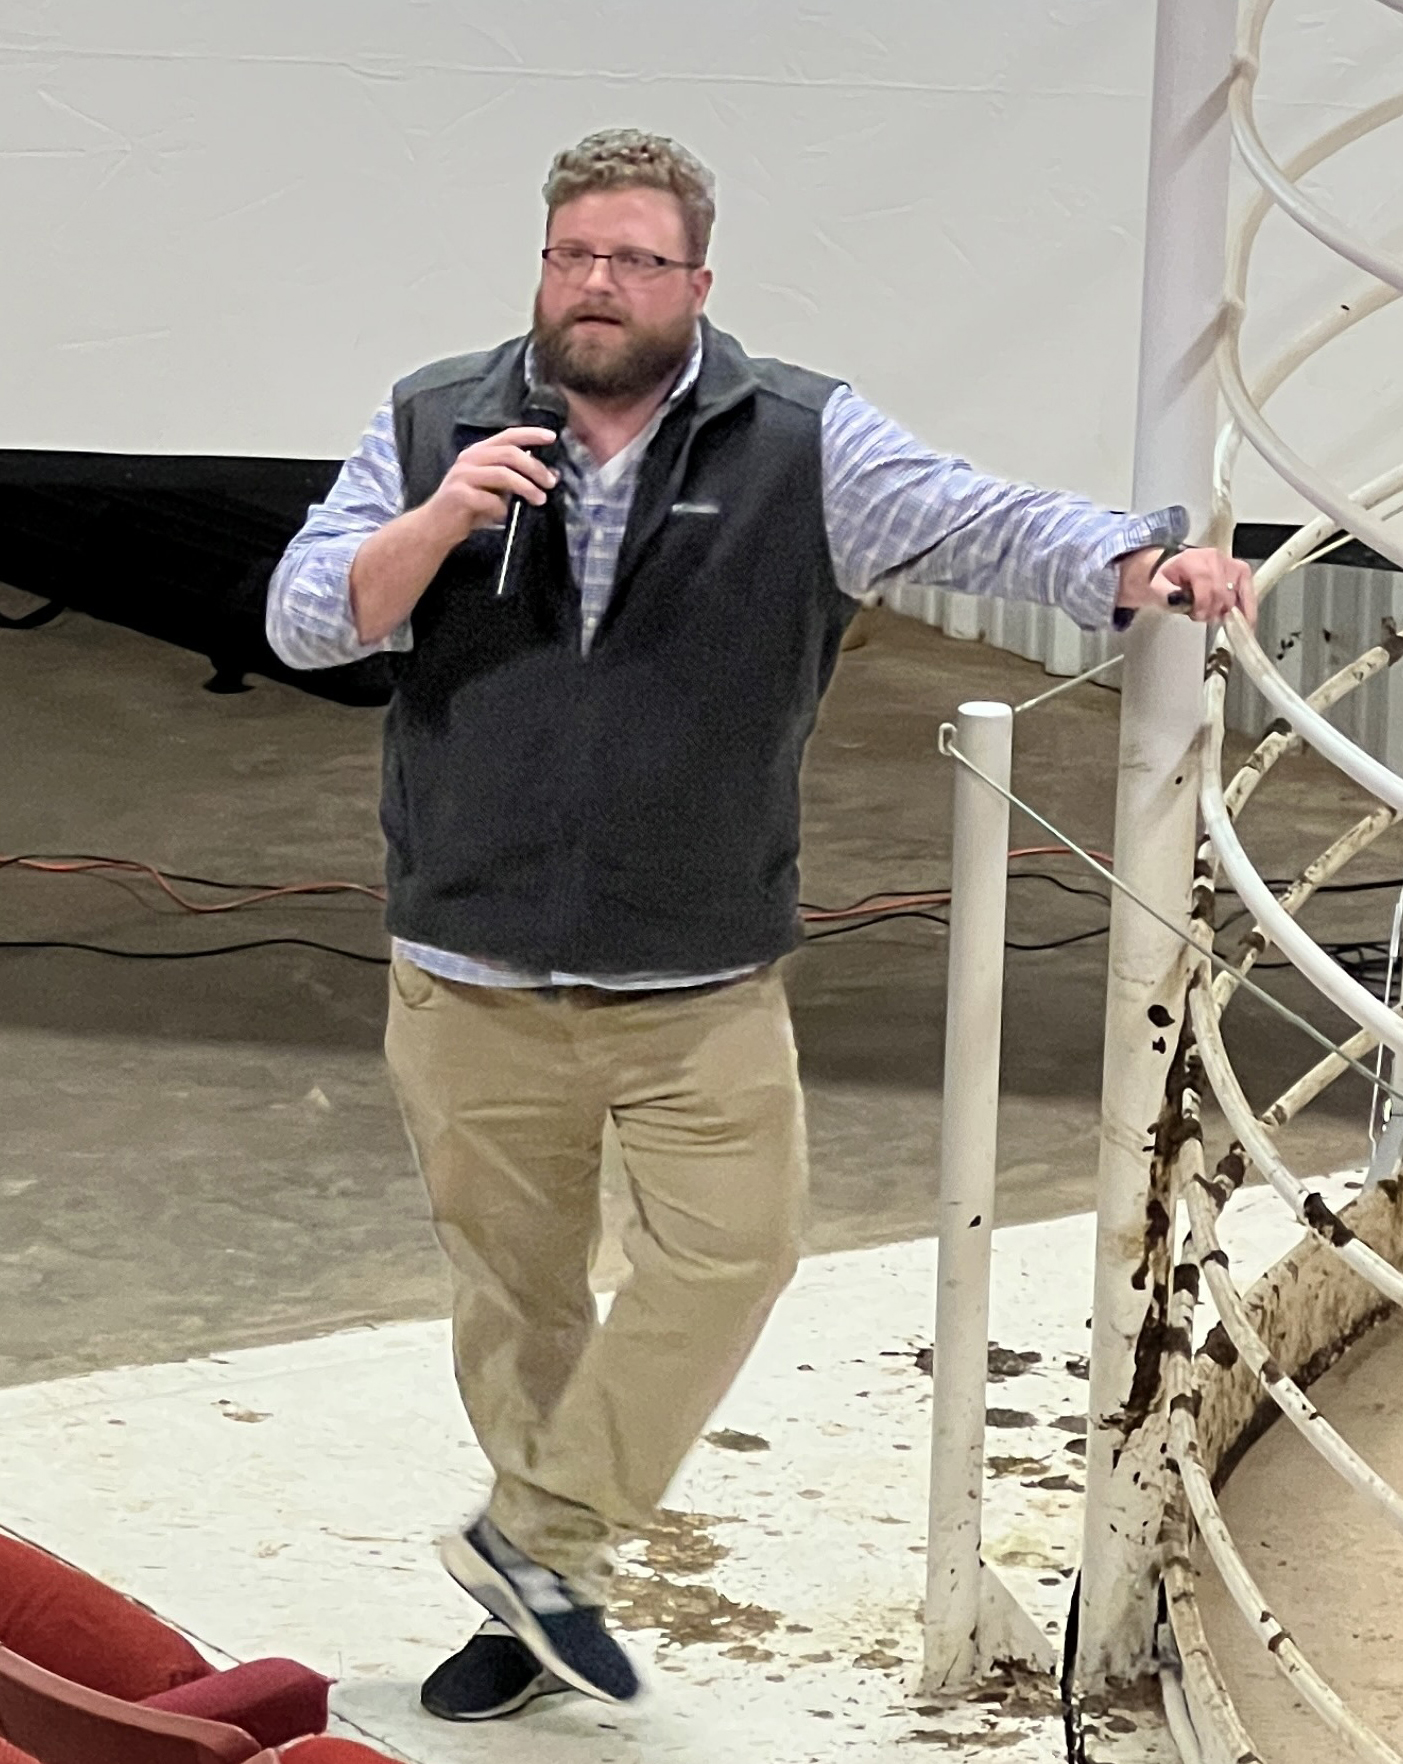 James Mitchell standing on the floor of a cattle auction speaking to audience.